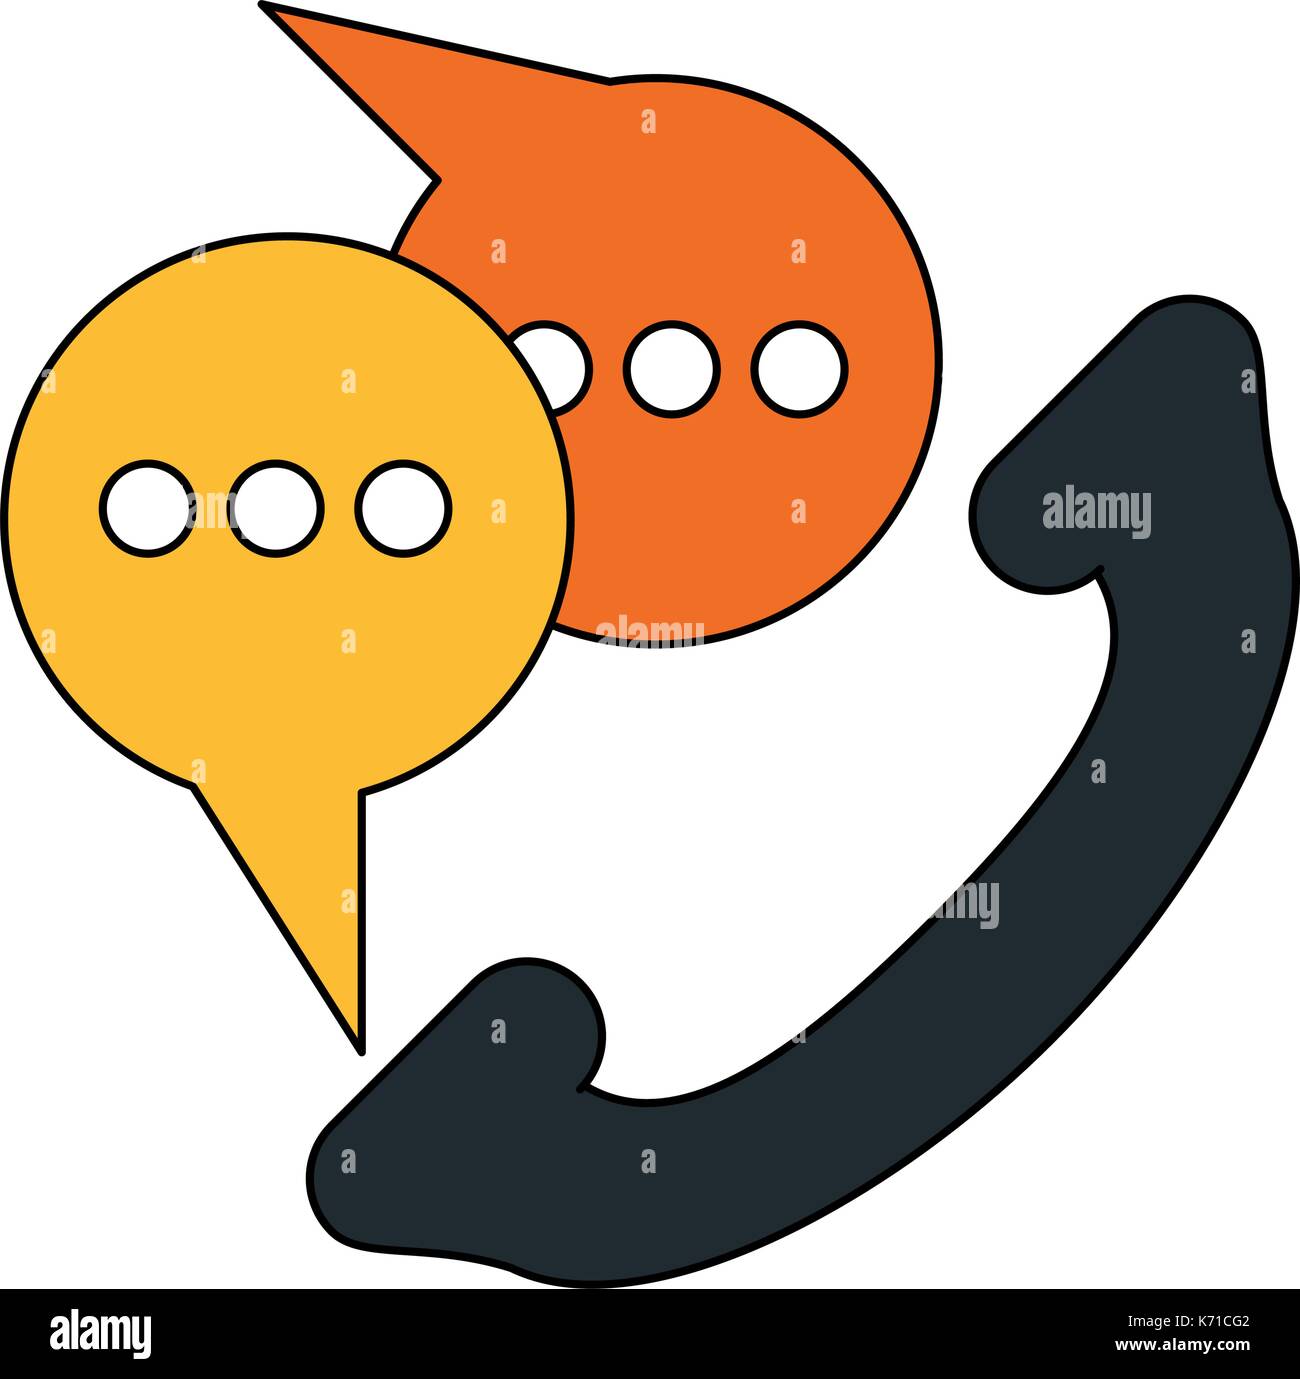 telephone instant message conversation icon image  Stock Vector